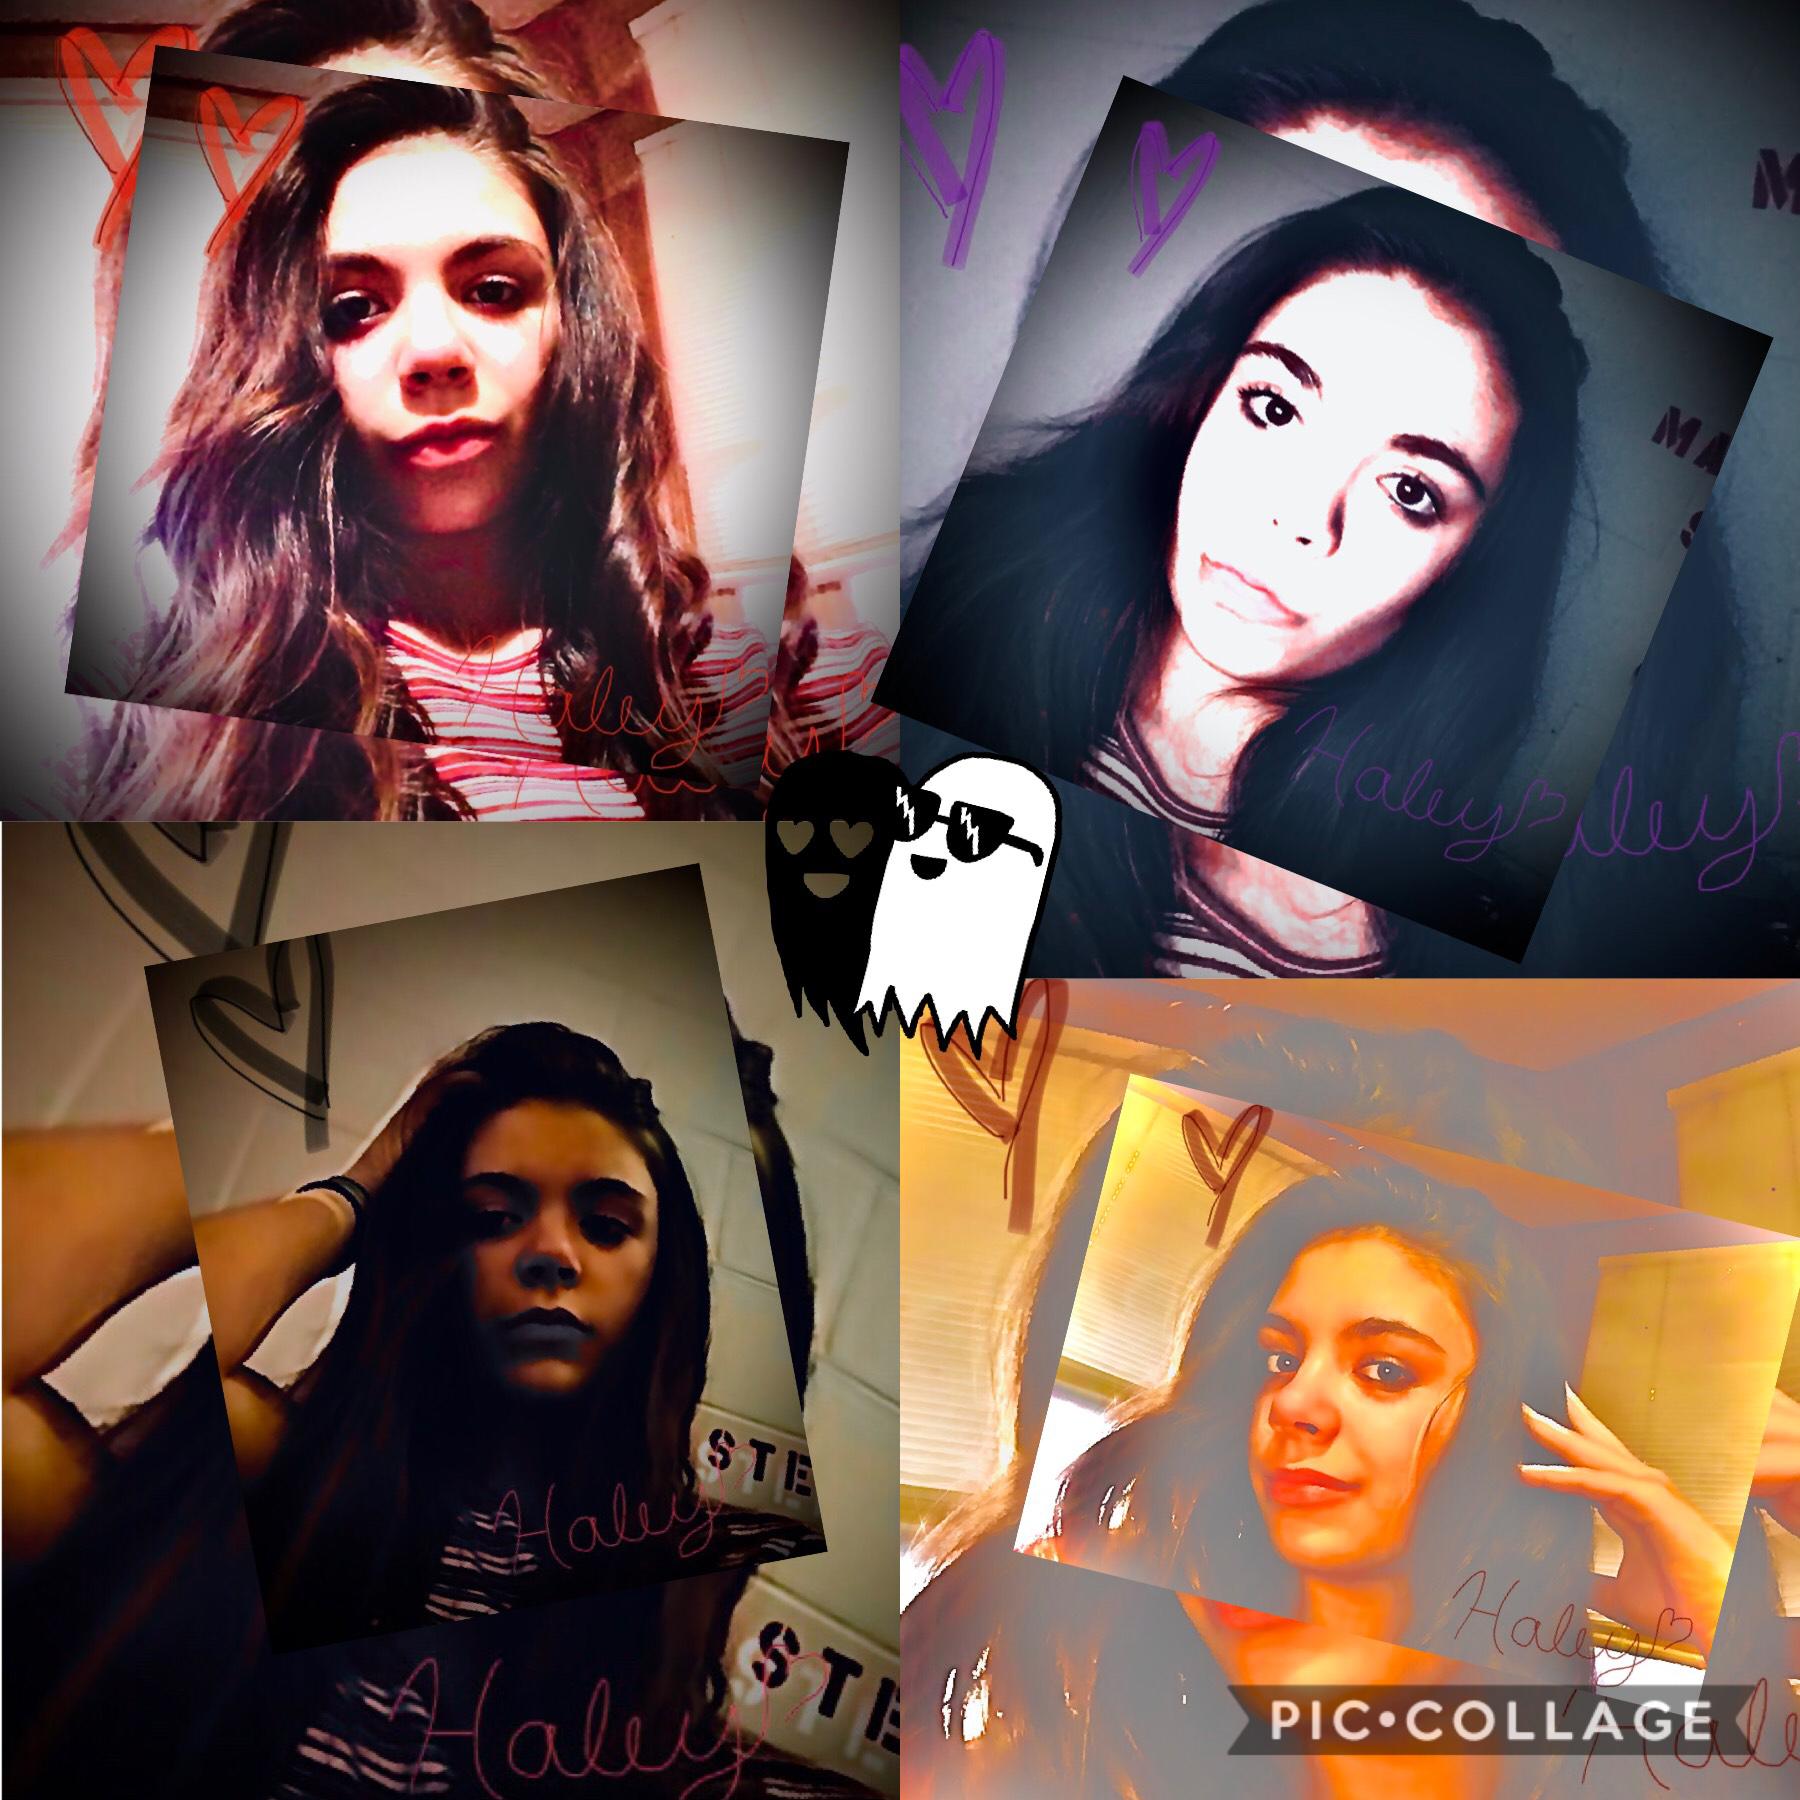 You decide witch one you like the best 1,2,3,4 and if u send me a photo of you i can edit it to if u guys likme